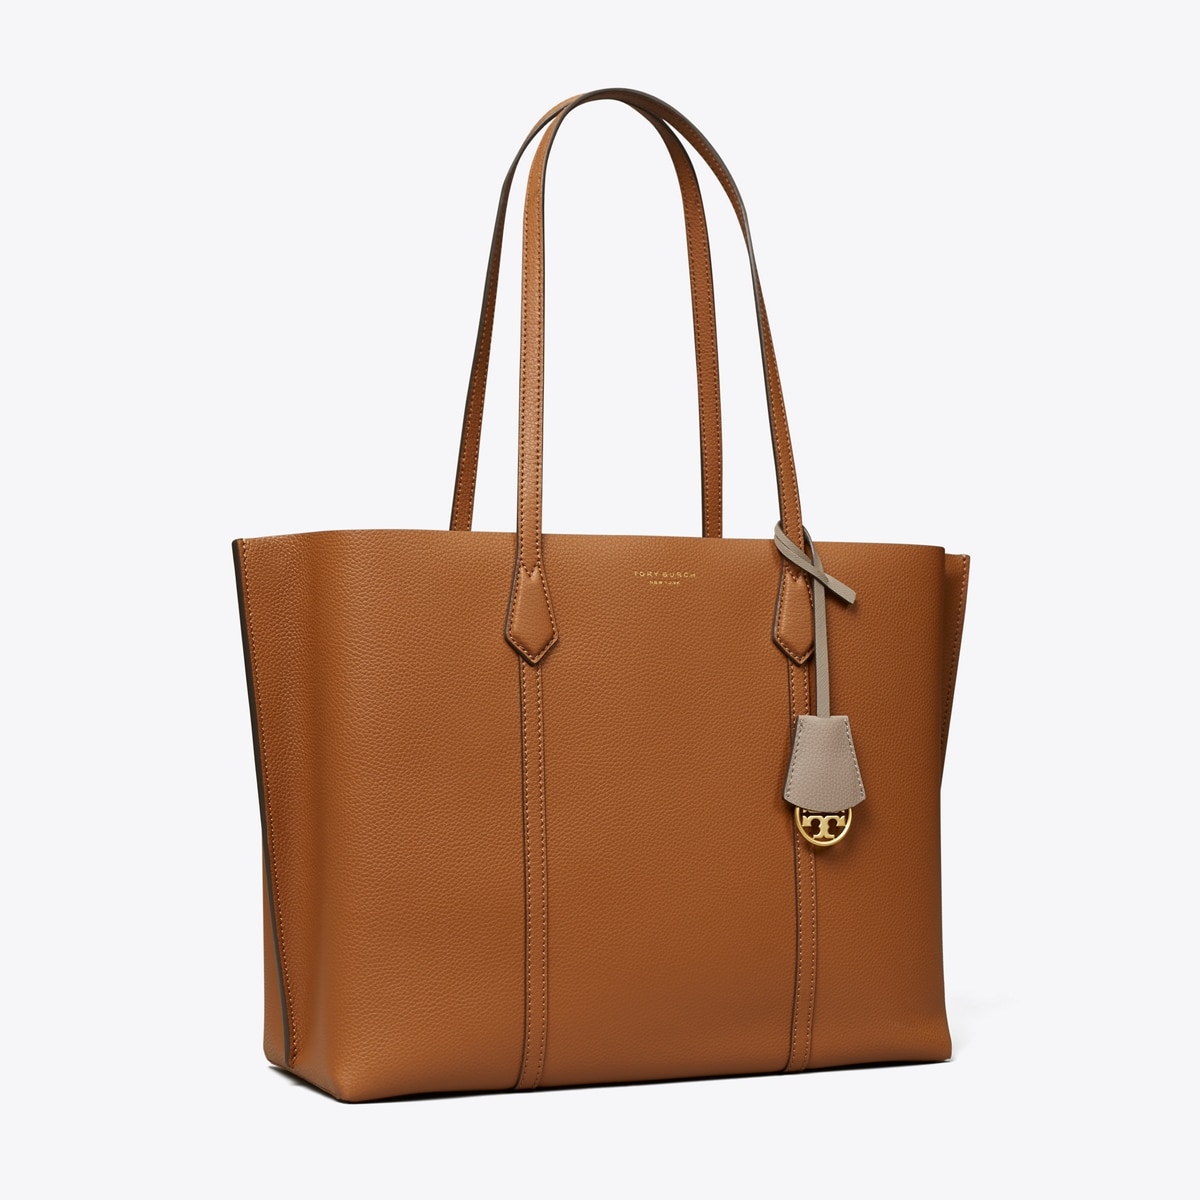 Perry Triple-Compartment Tote Bag: Women's Designer Tote Bags | Tory Burch